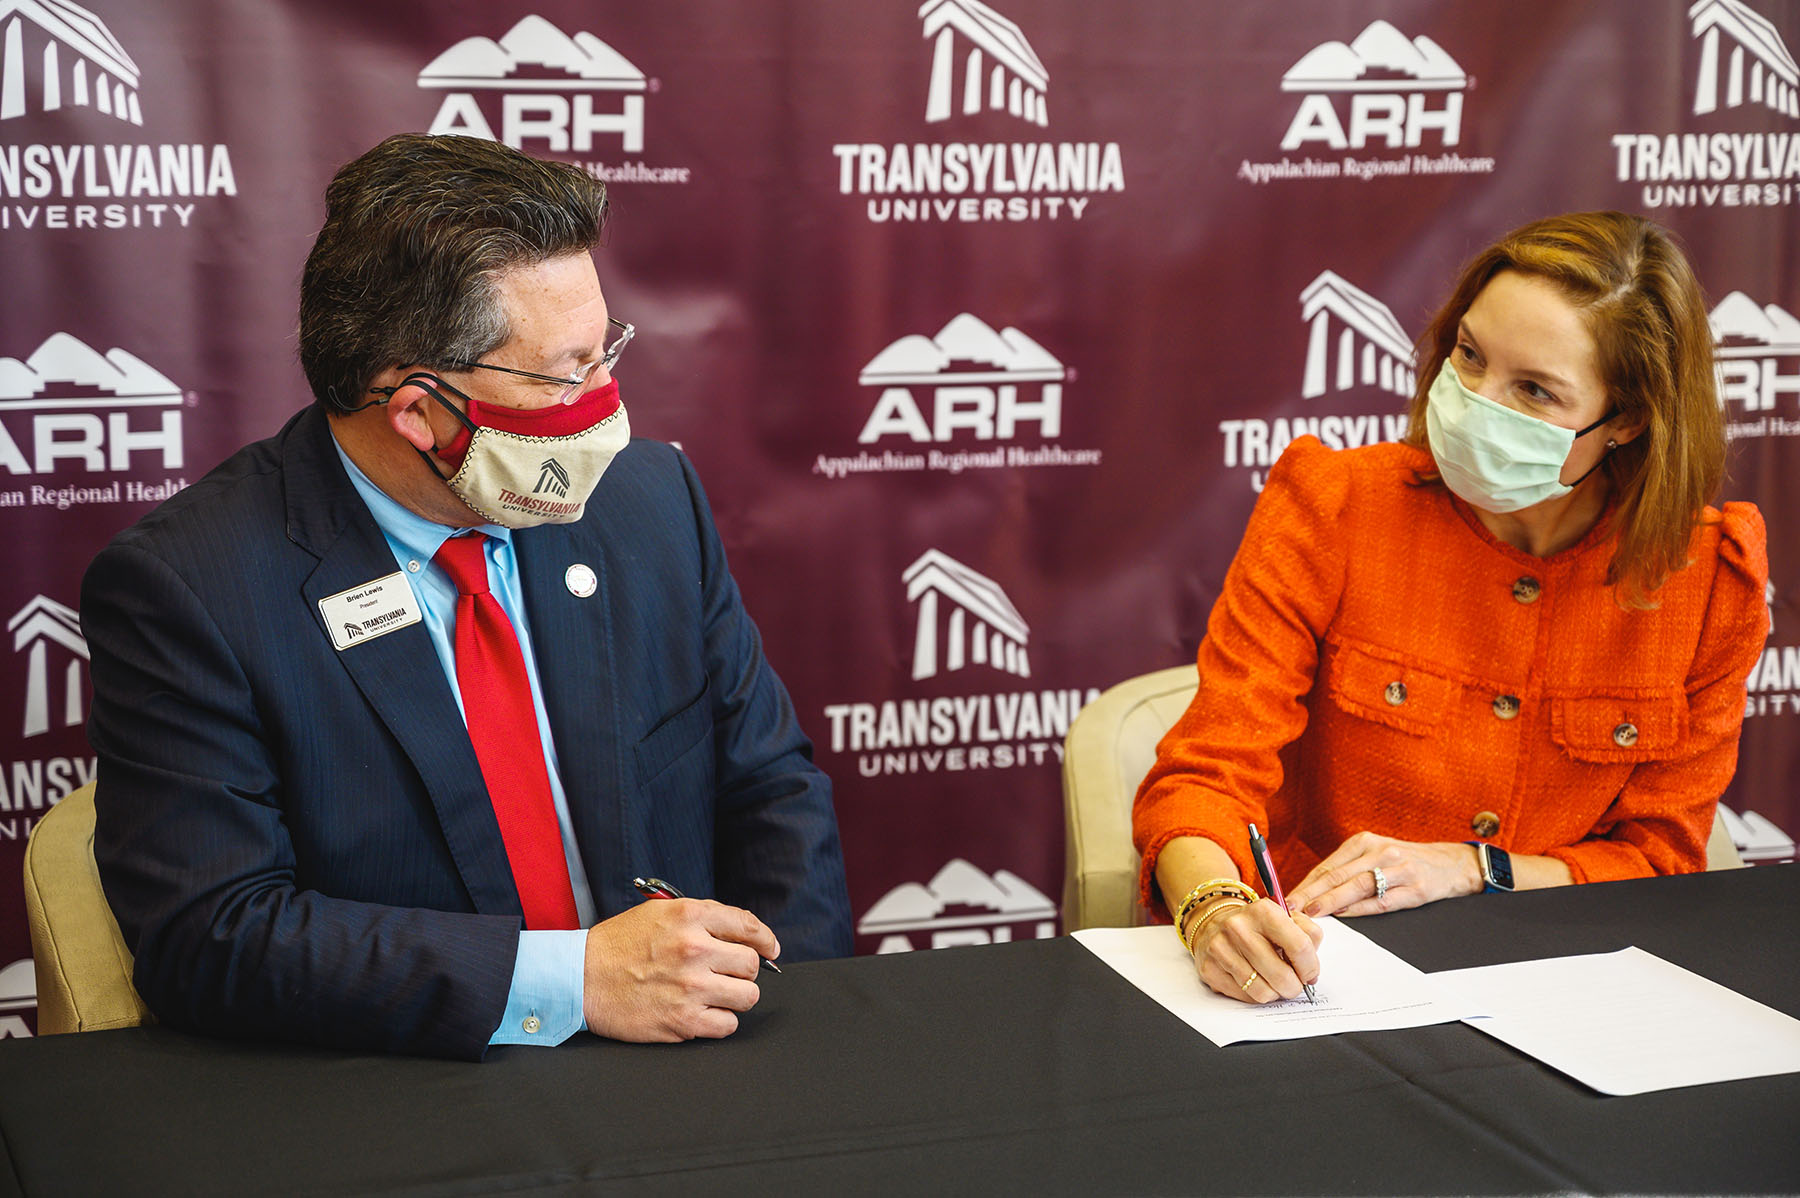 New Transylvania, ARH partnership provides incentives for students from Eastern Kentucky, West Virginia